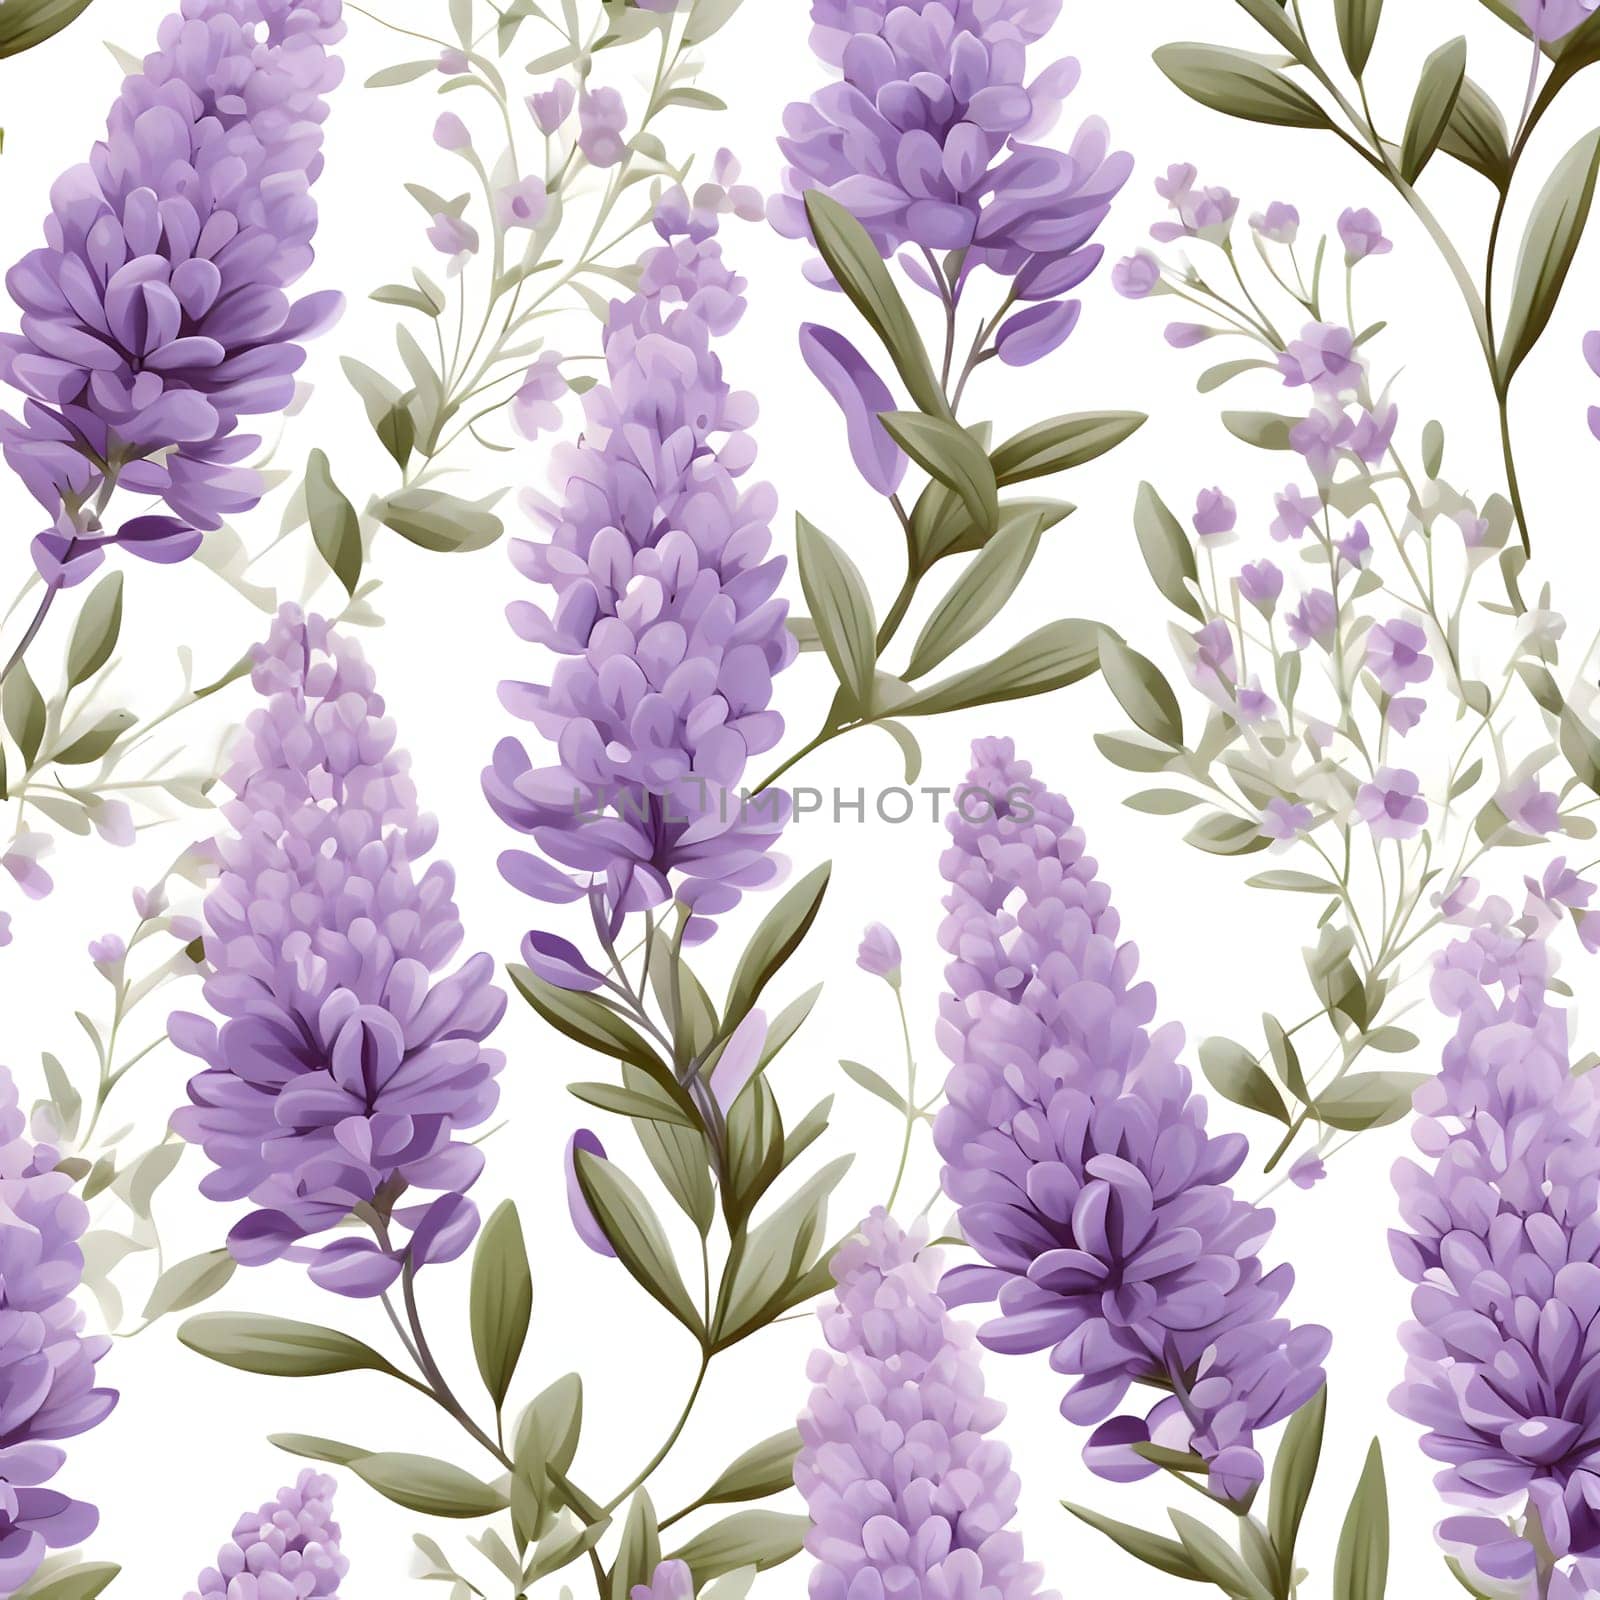 Patterns and banners backgrounds: Watercolor lavender seamless pattern on white background. Vector illustration.